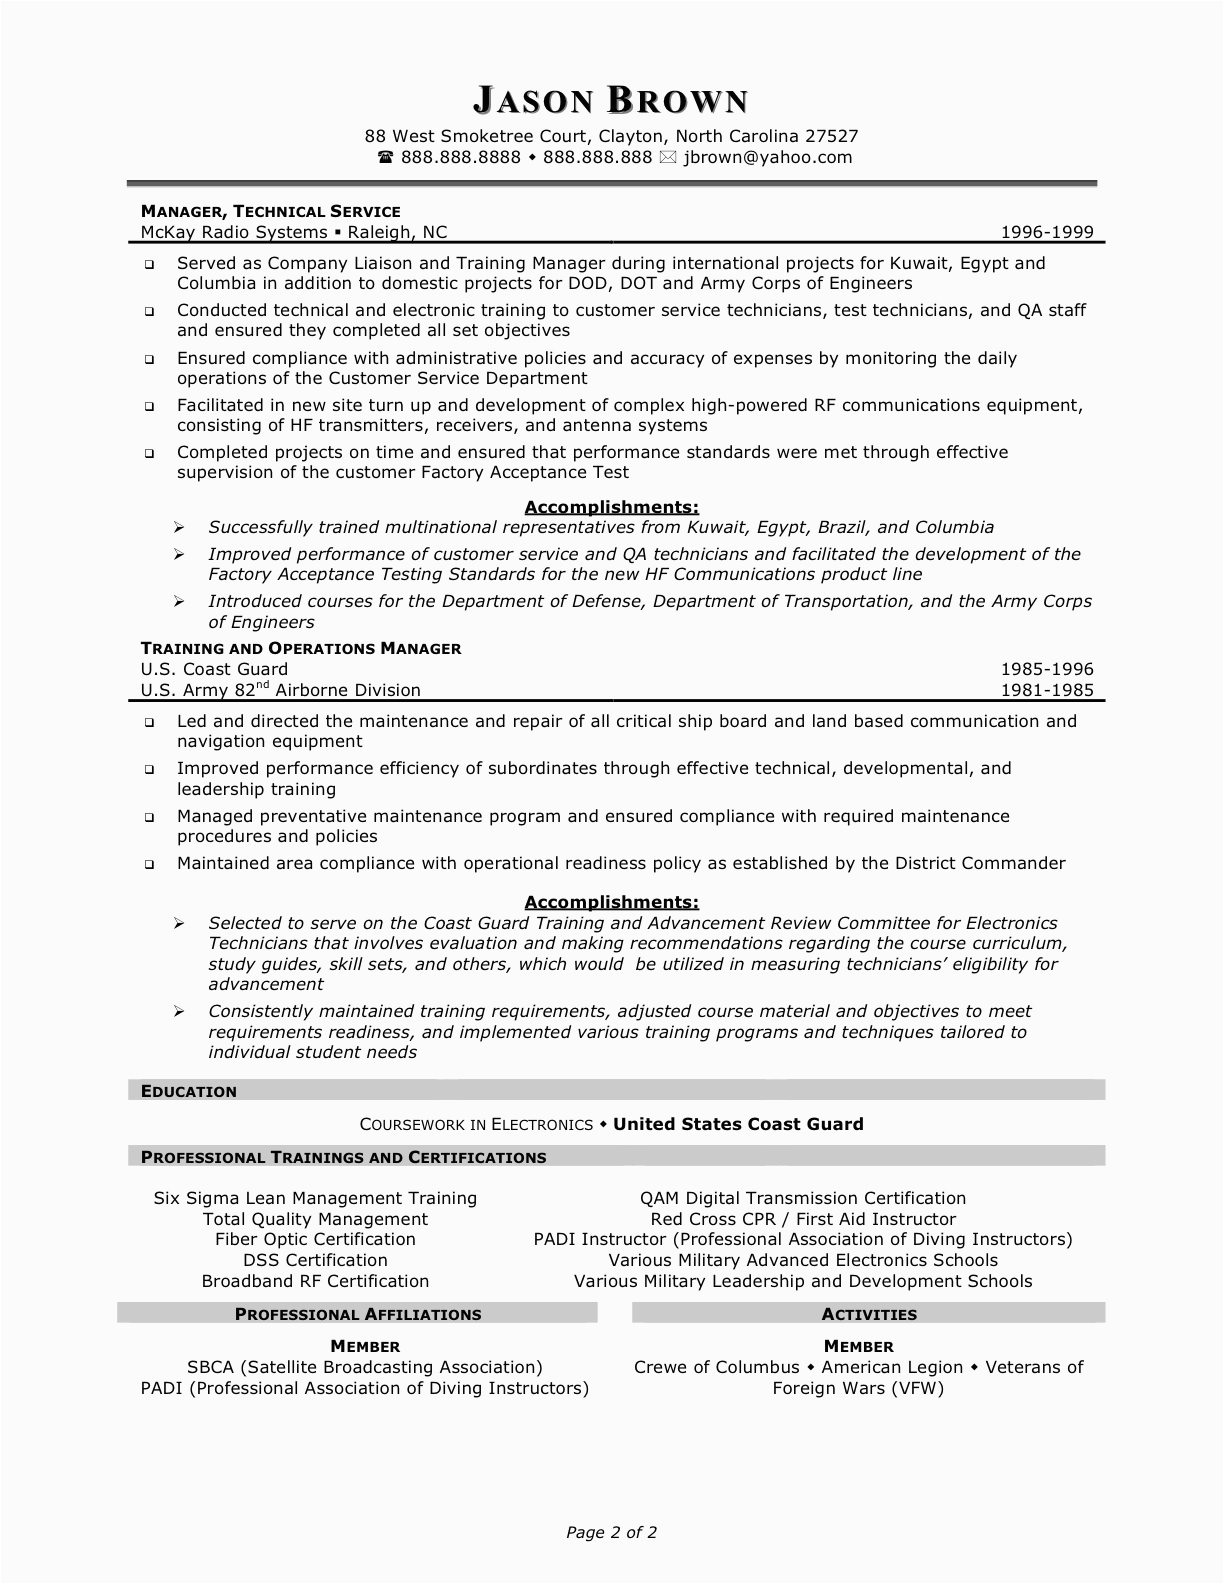 Customer Service Manager Resume Objective Sample Customer Services Manager Resume Objectives